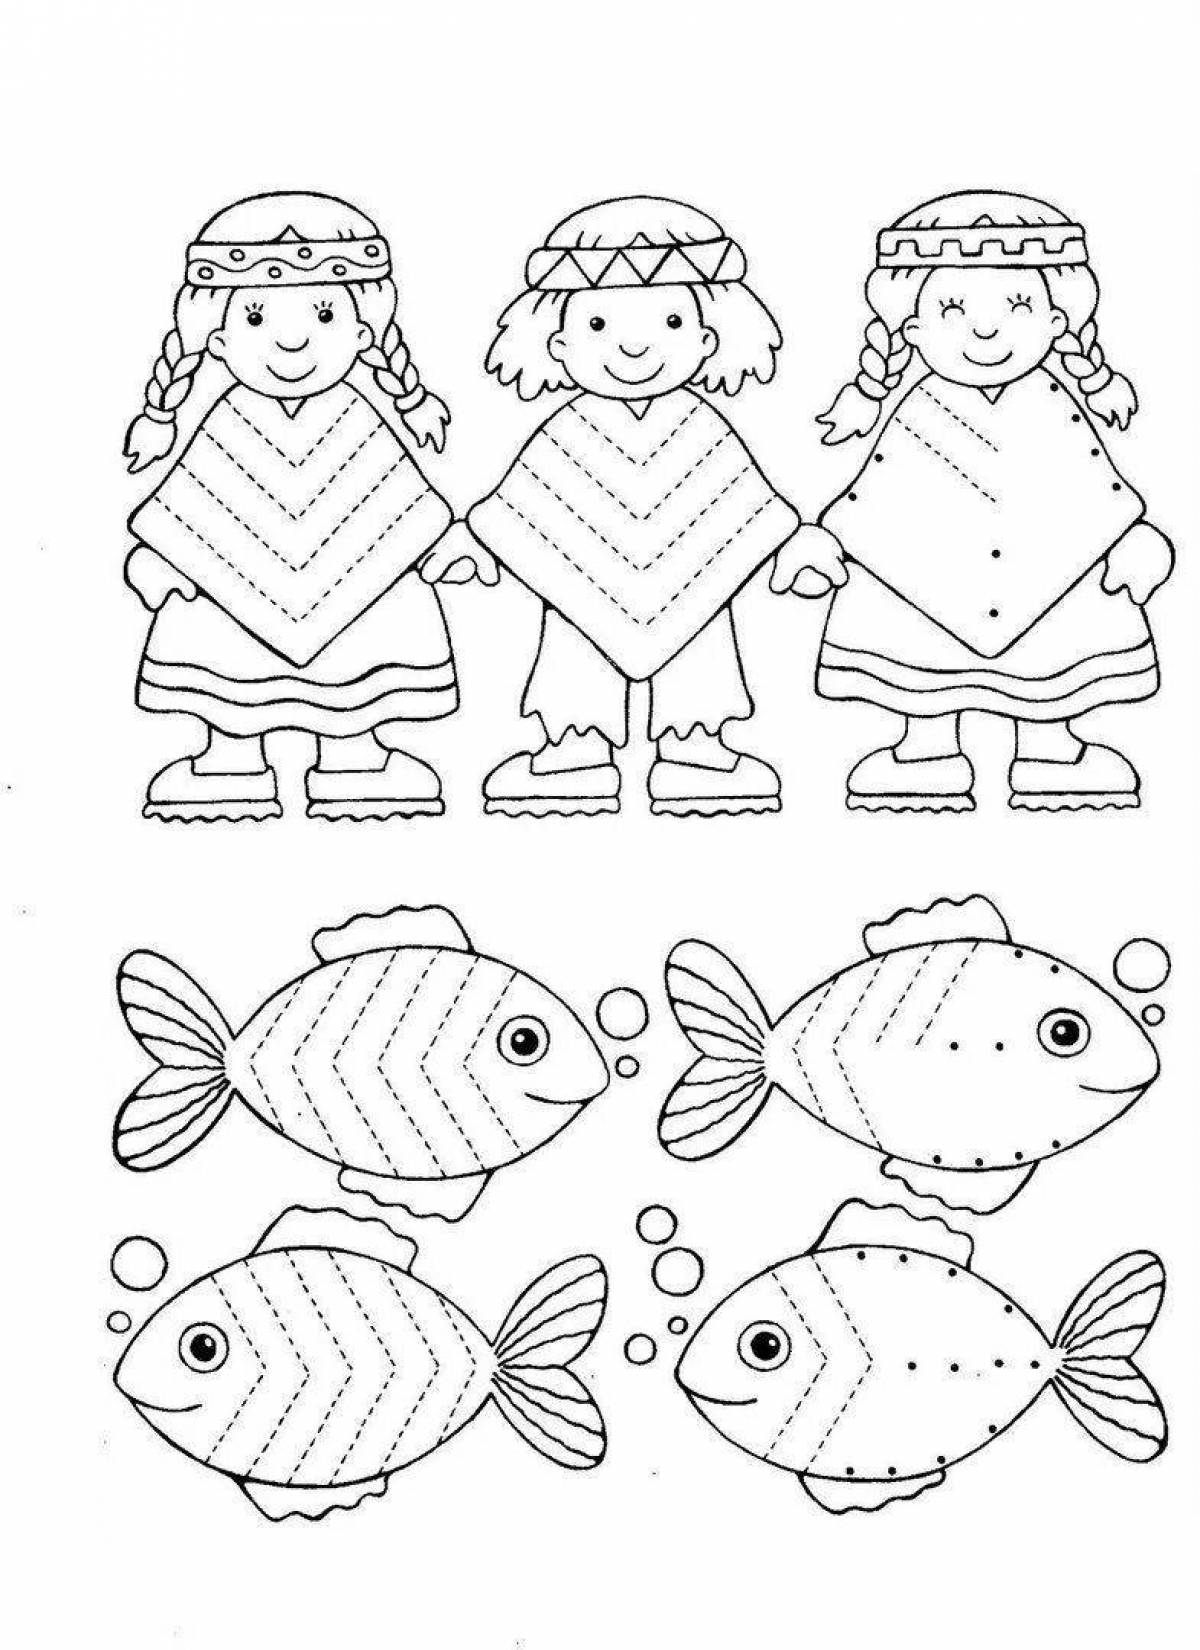 Adorable hatching coloring book for 7-8 year olds